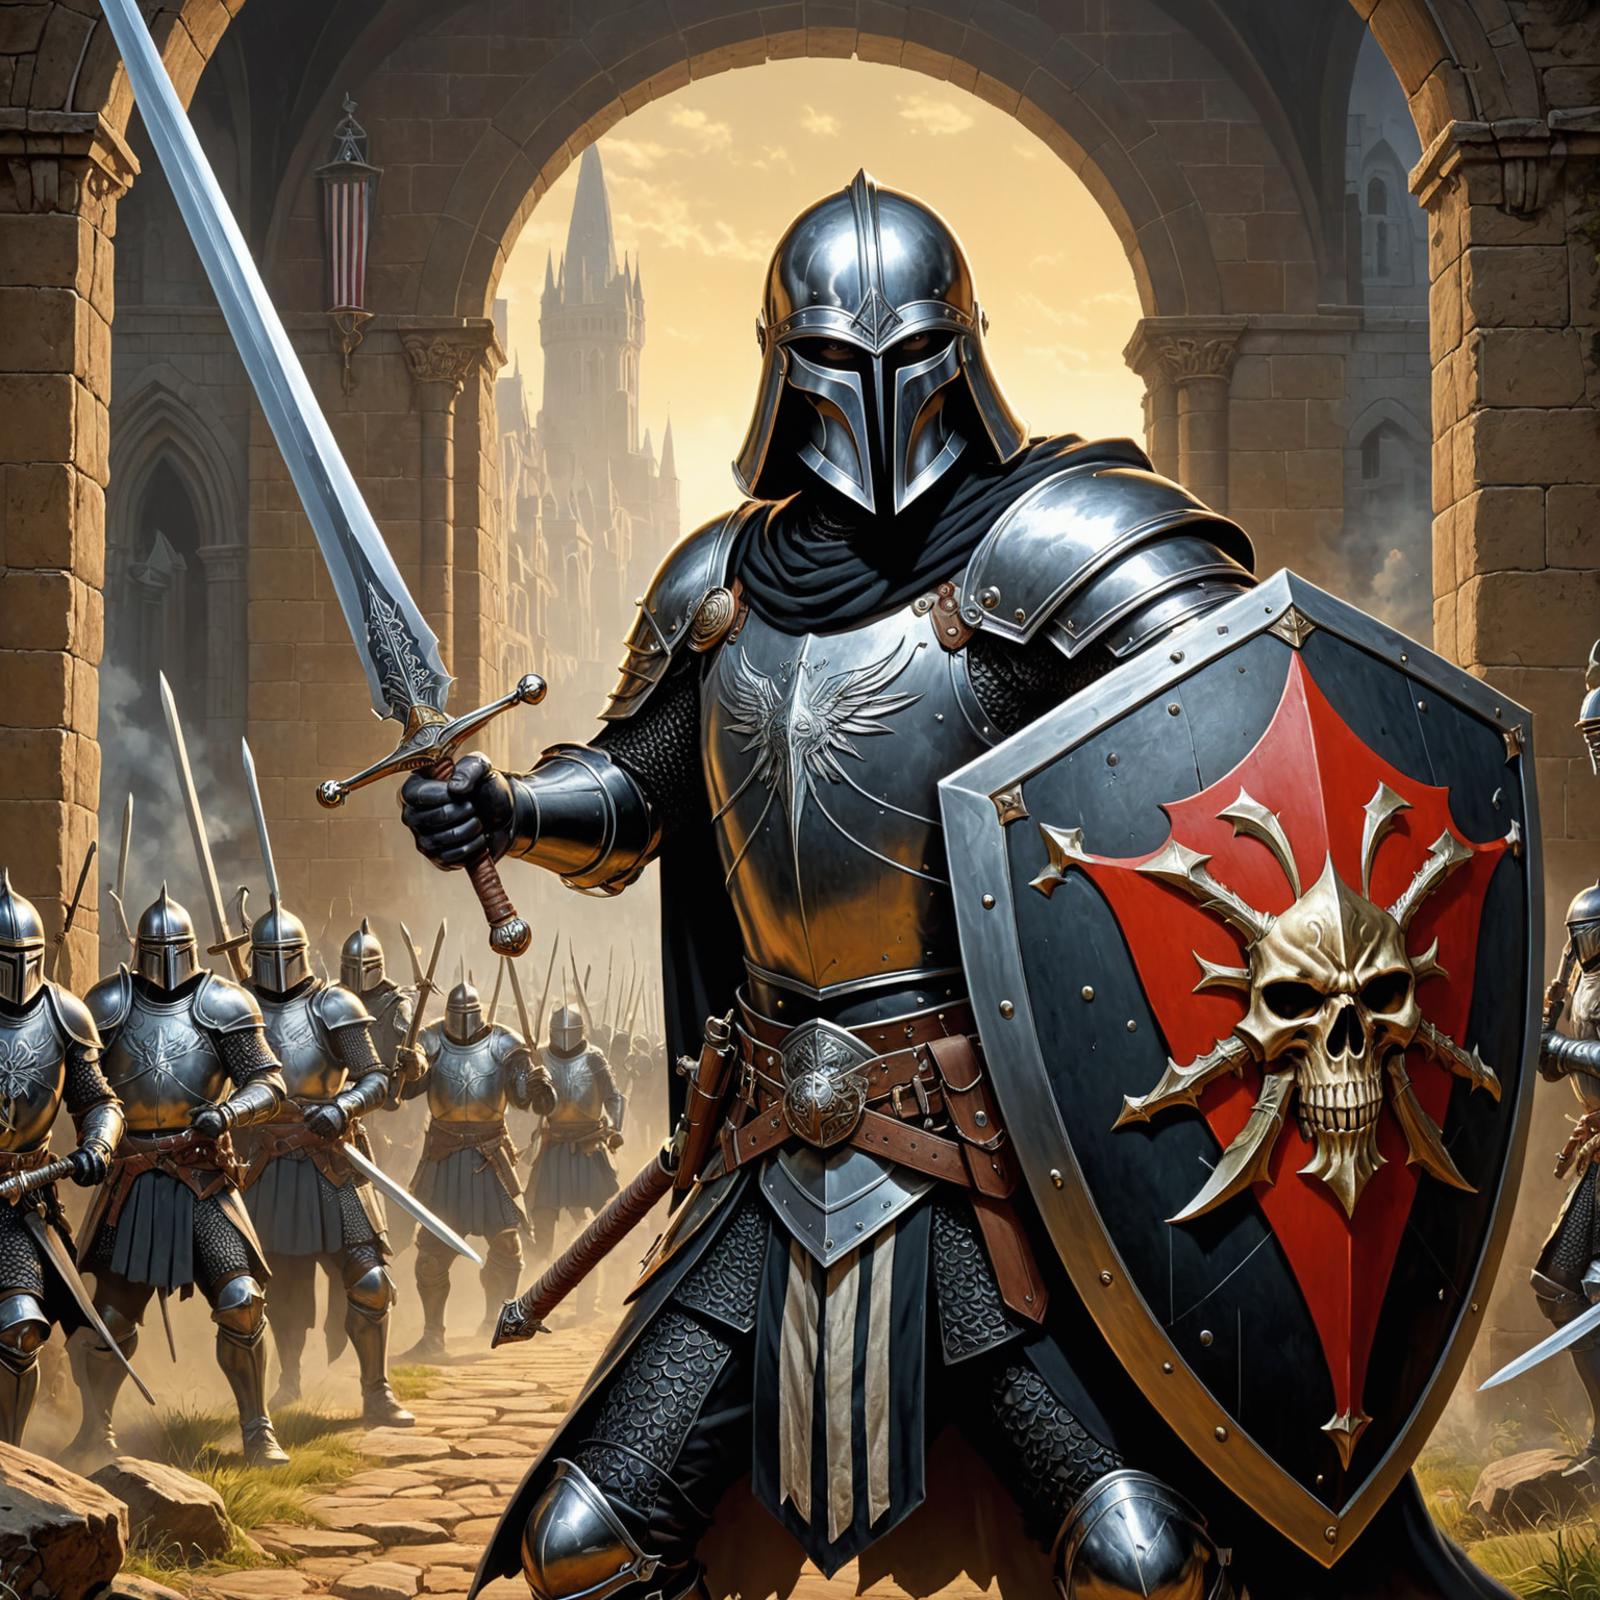 A fantasy artwork featuring a knight in silver armor holding a sword and shield.